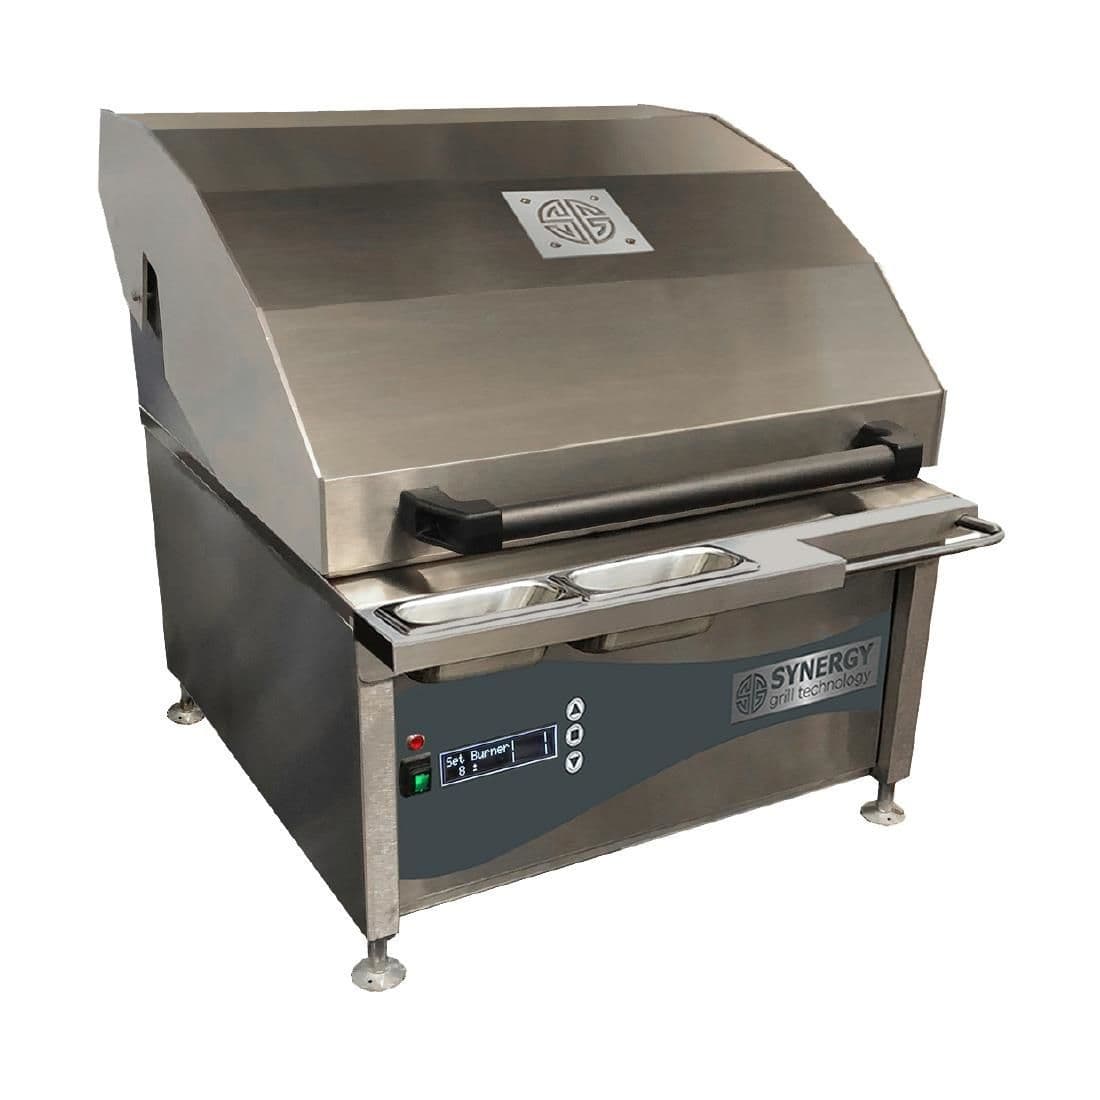 CX887 Synergy Grill Electric Chargrill Oven CGO600E JD Catering Equipment Solutions Ltd